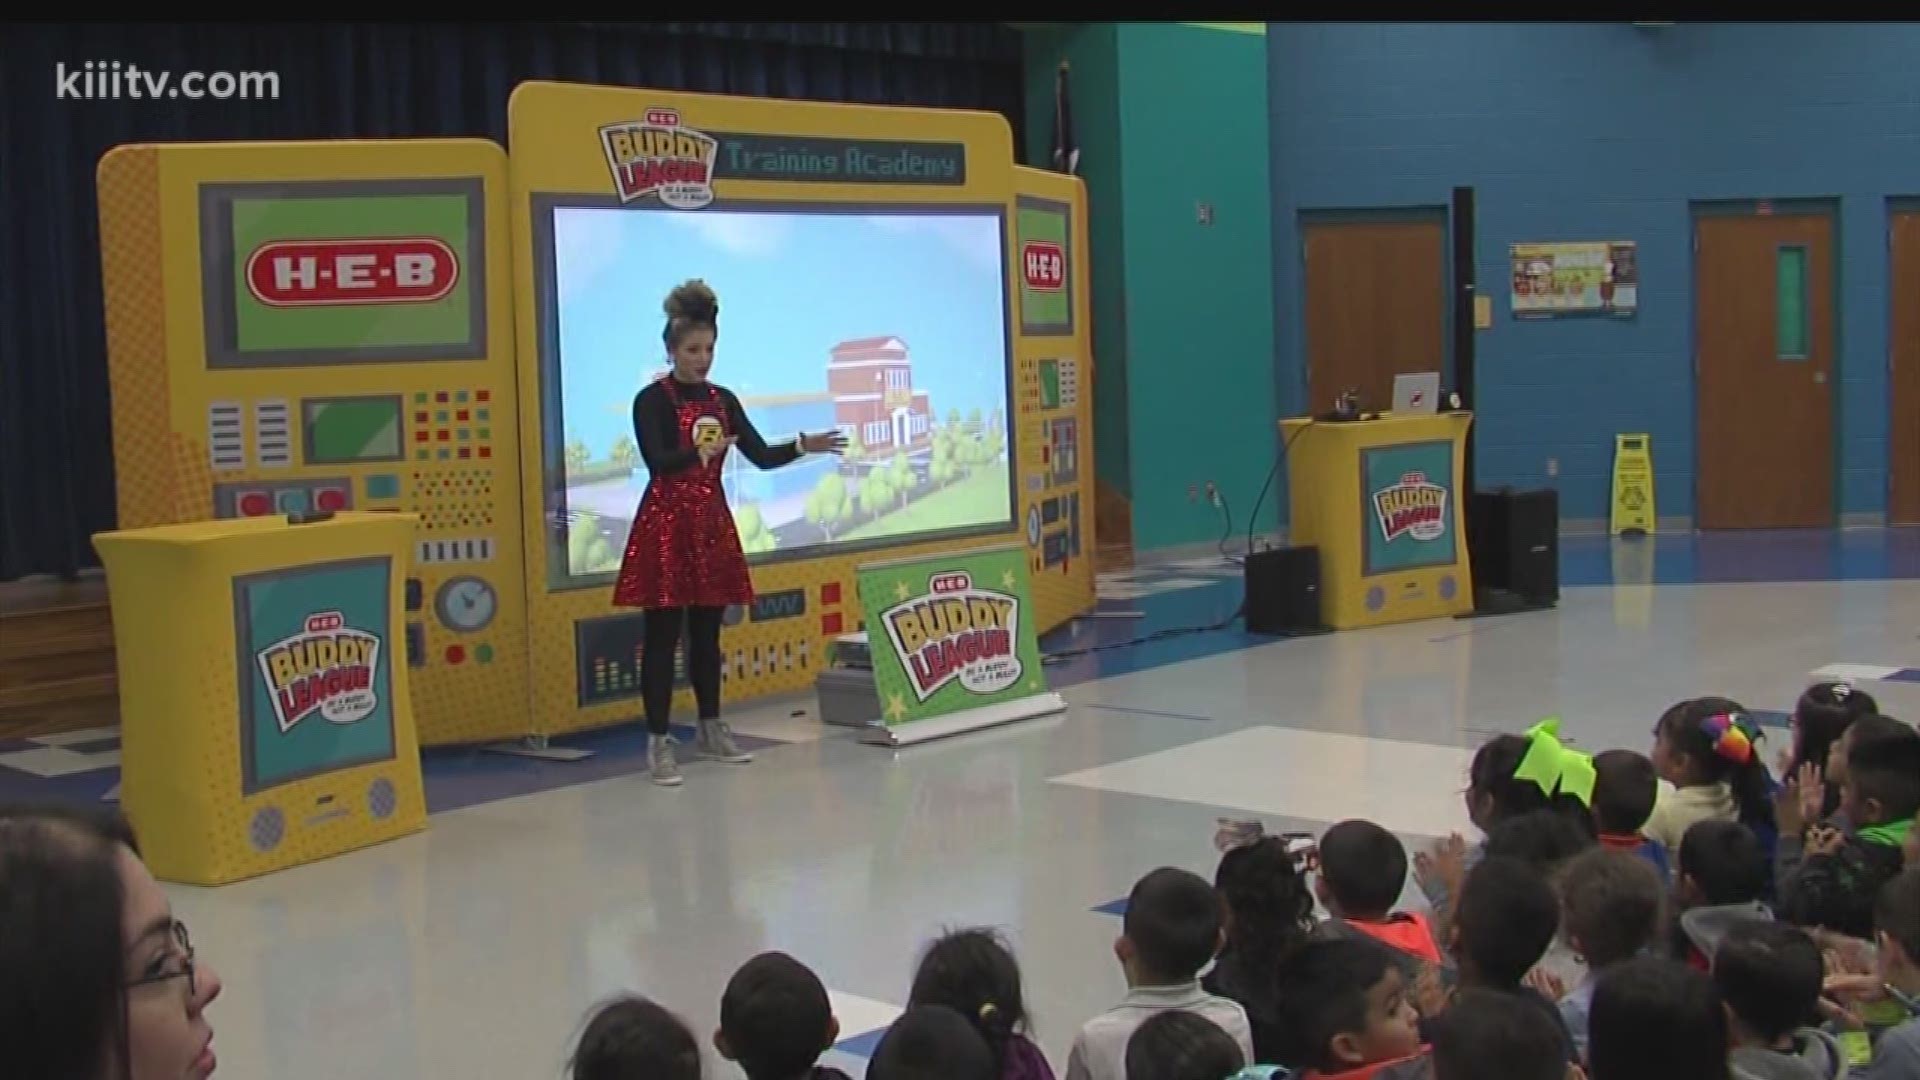 Students at Rose Shaw Elementary school hosted the H-E-B Buddy League Training Academy Wednesday morning to teach students about standing up to bullying.